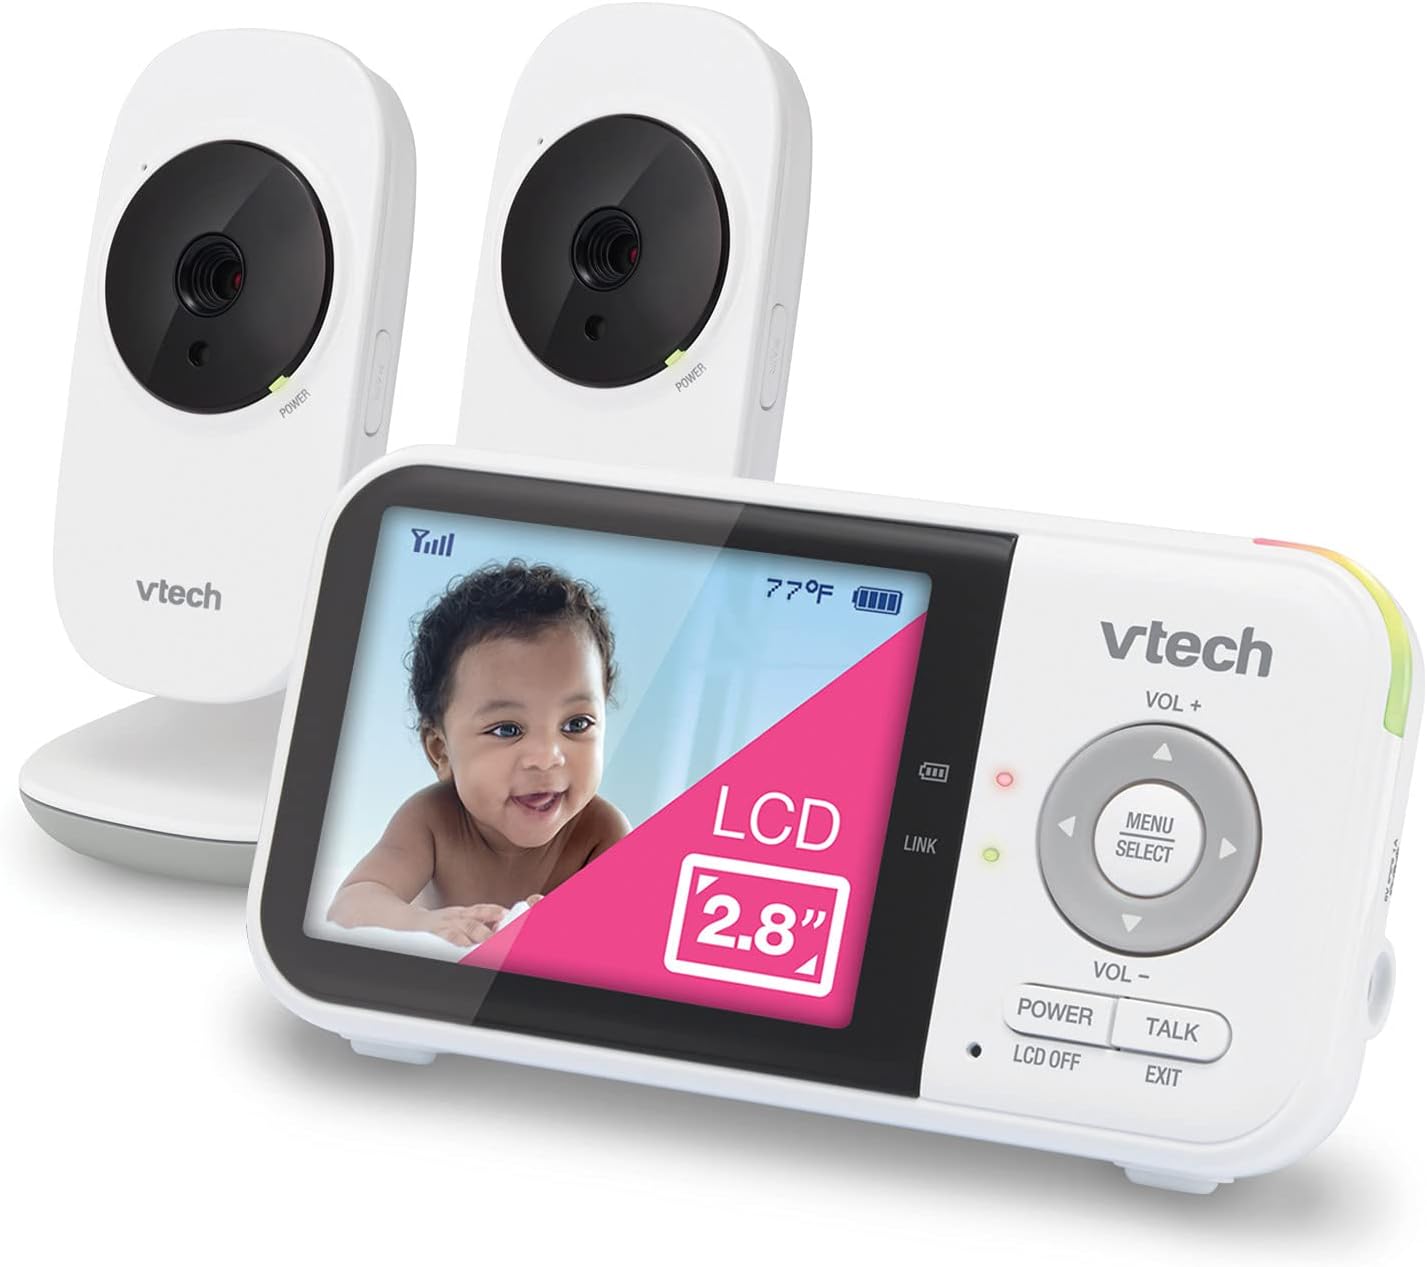 VTech VM819 Video Baby Monitor with 19 Hour Battery Life, 1000ft Long Range, 2.8” Display, Auto Night Vision, 2Way Audio Talk, Temperature Sensor and Lullabies,480p